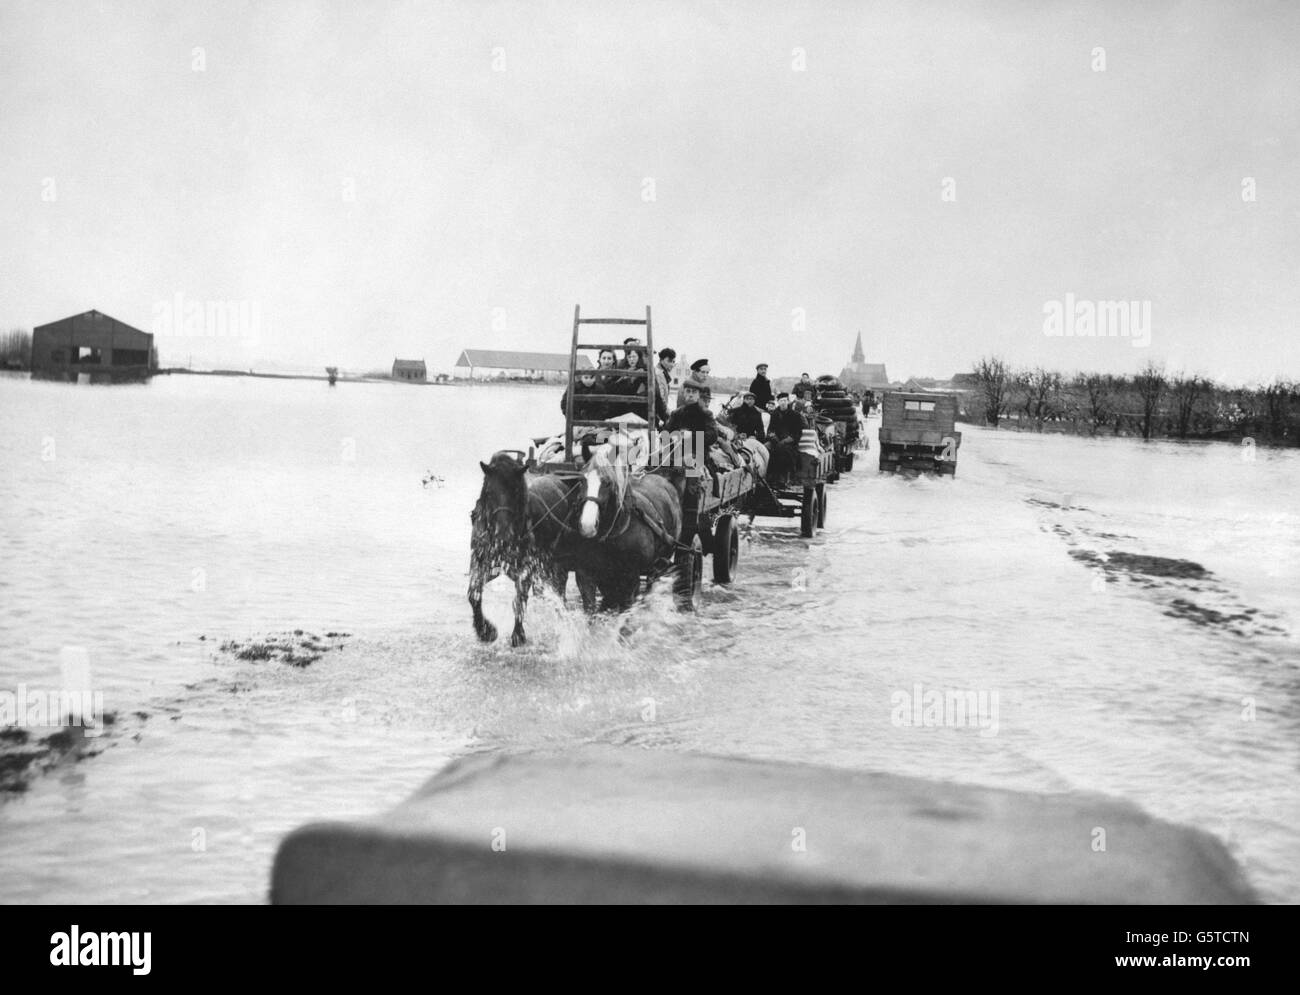 Inhabitants of Kruiningen, Zuid Beveland, Holland, use horse-drawn carts to cross flood waters as they flee their homes. Stock Photo